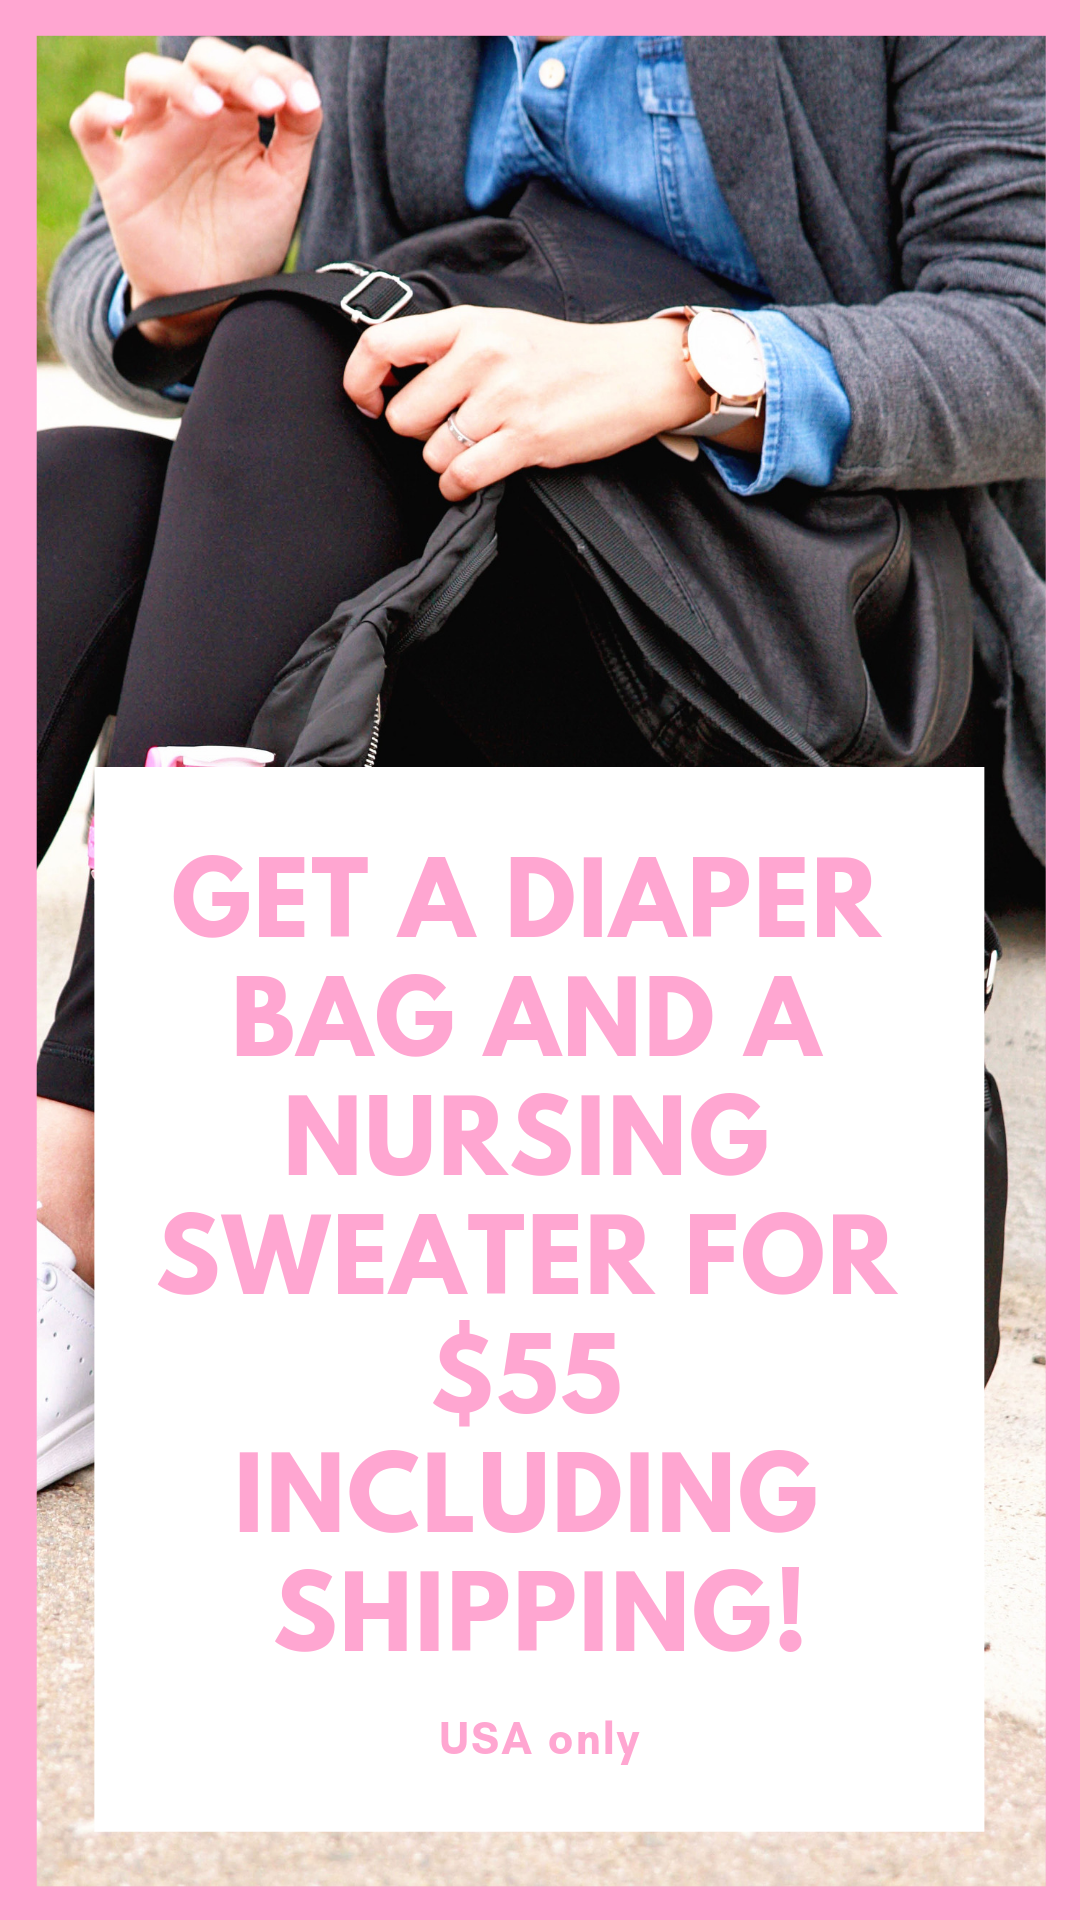 Get a diaper bag and a nursing sweater for $55 including shipping!